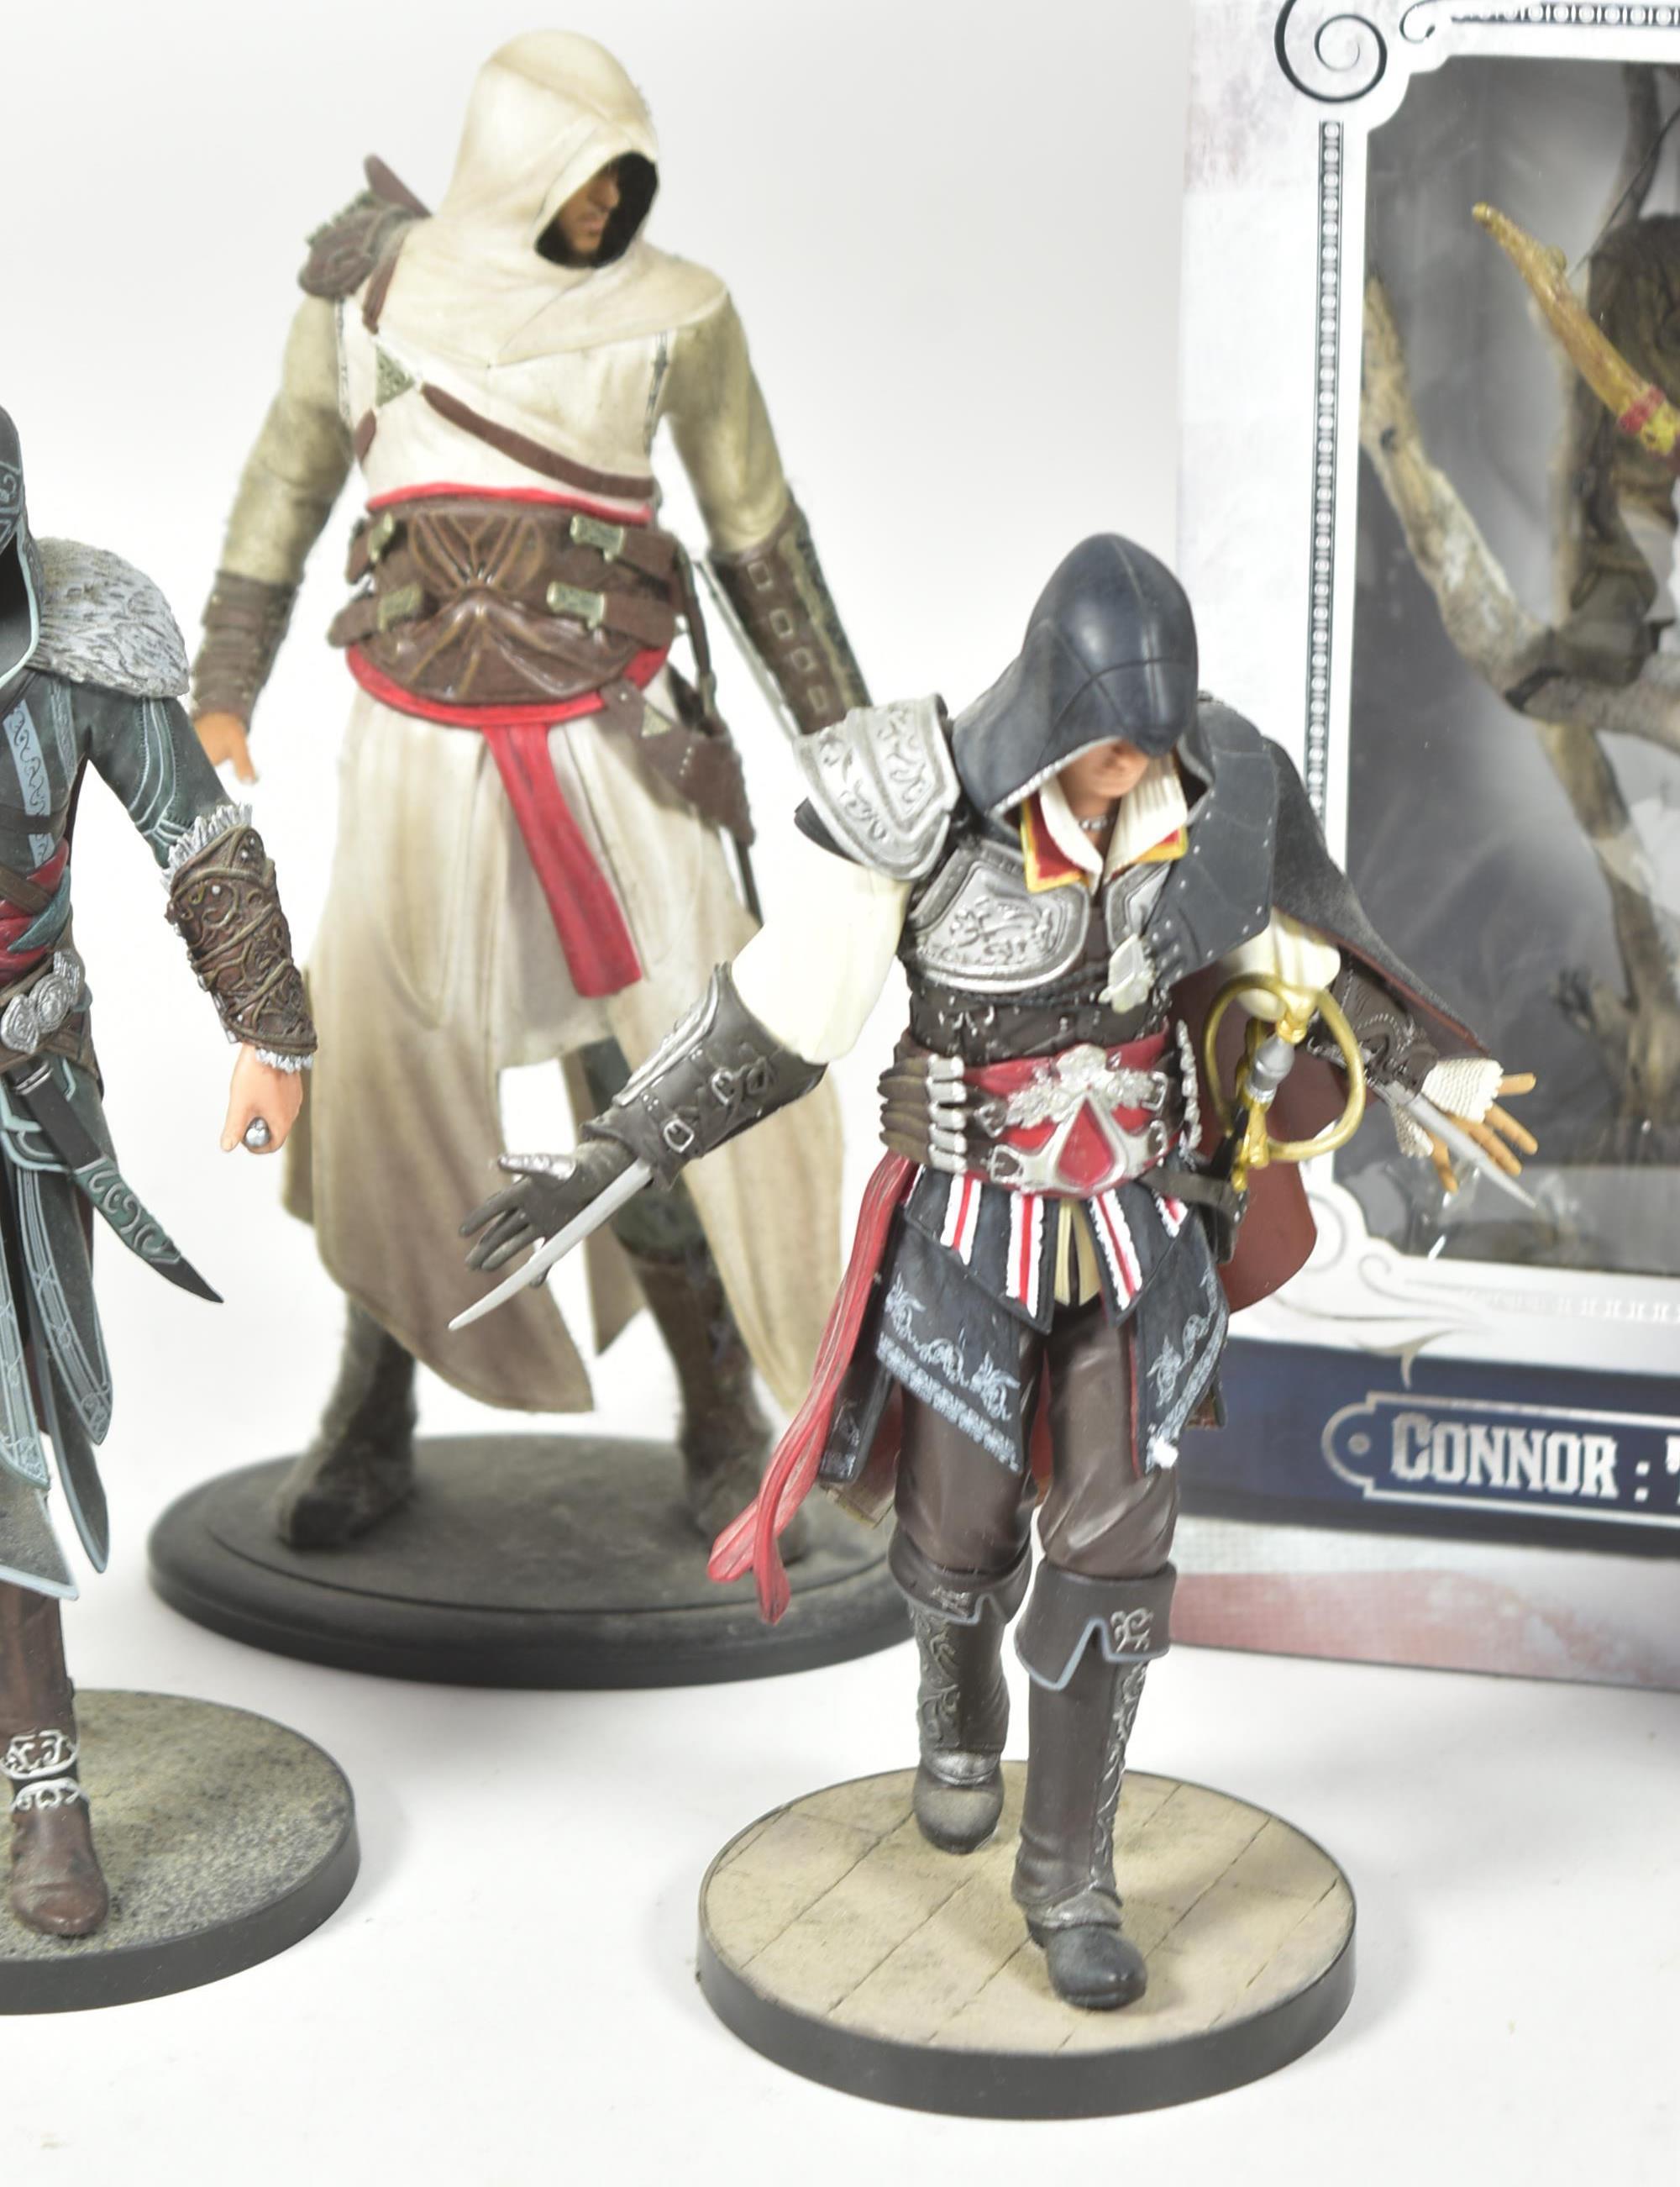 ASSASSINS CREED - UBI COLLECIBLES FIGURINES - Image 3 of 6